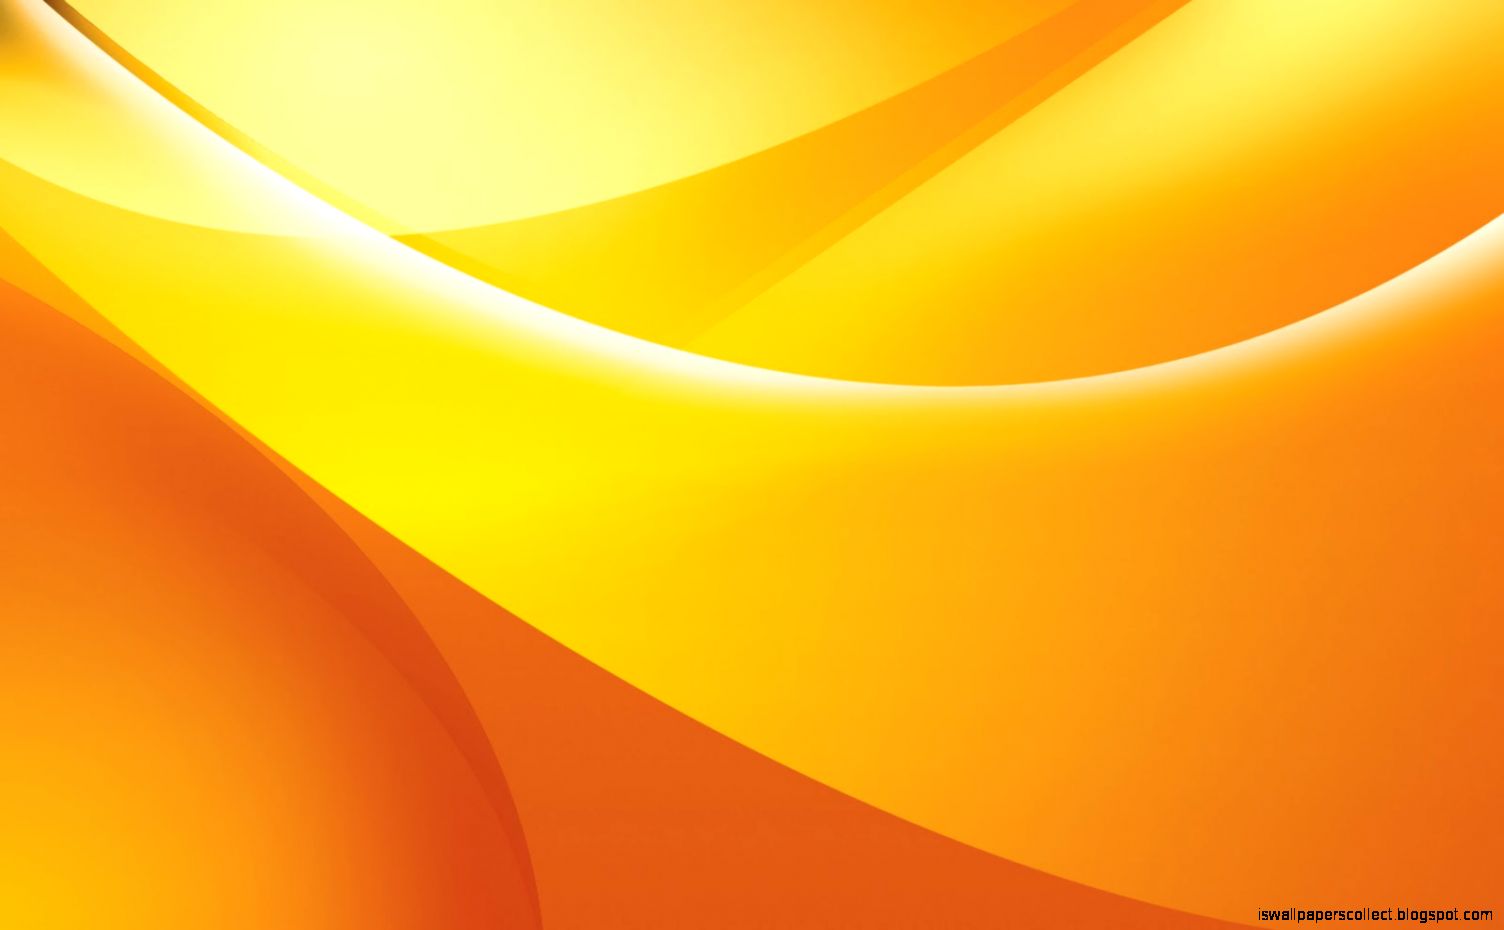 Orange Abstract Wallpaper | Wallpapers Collection